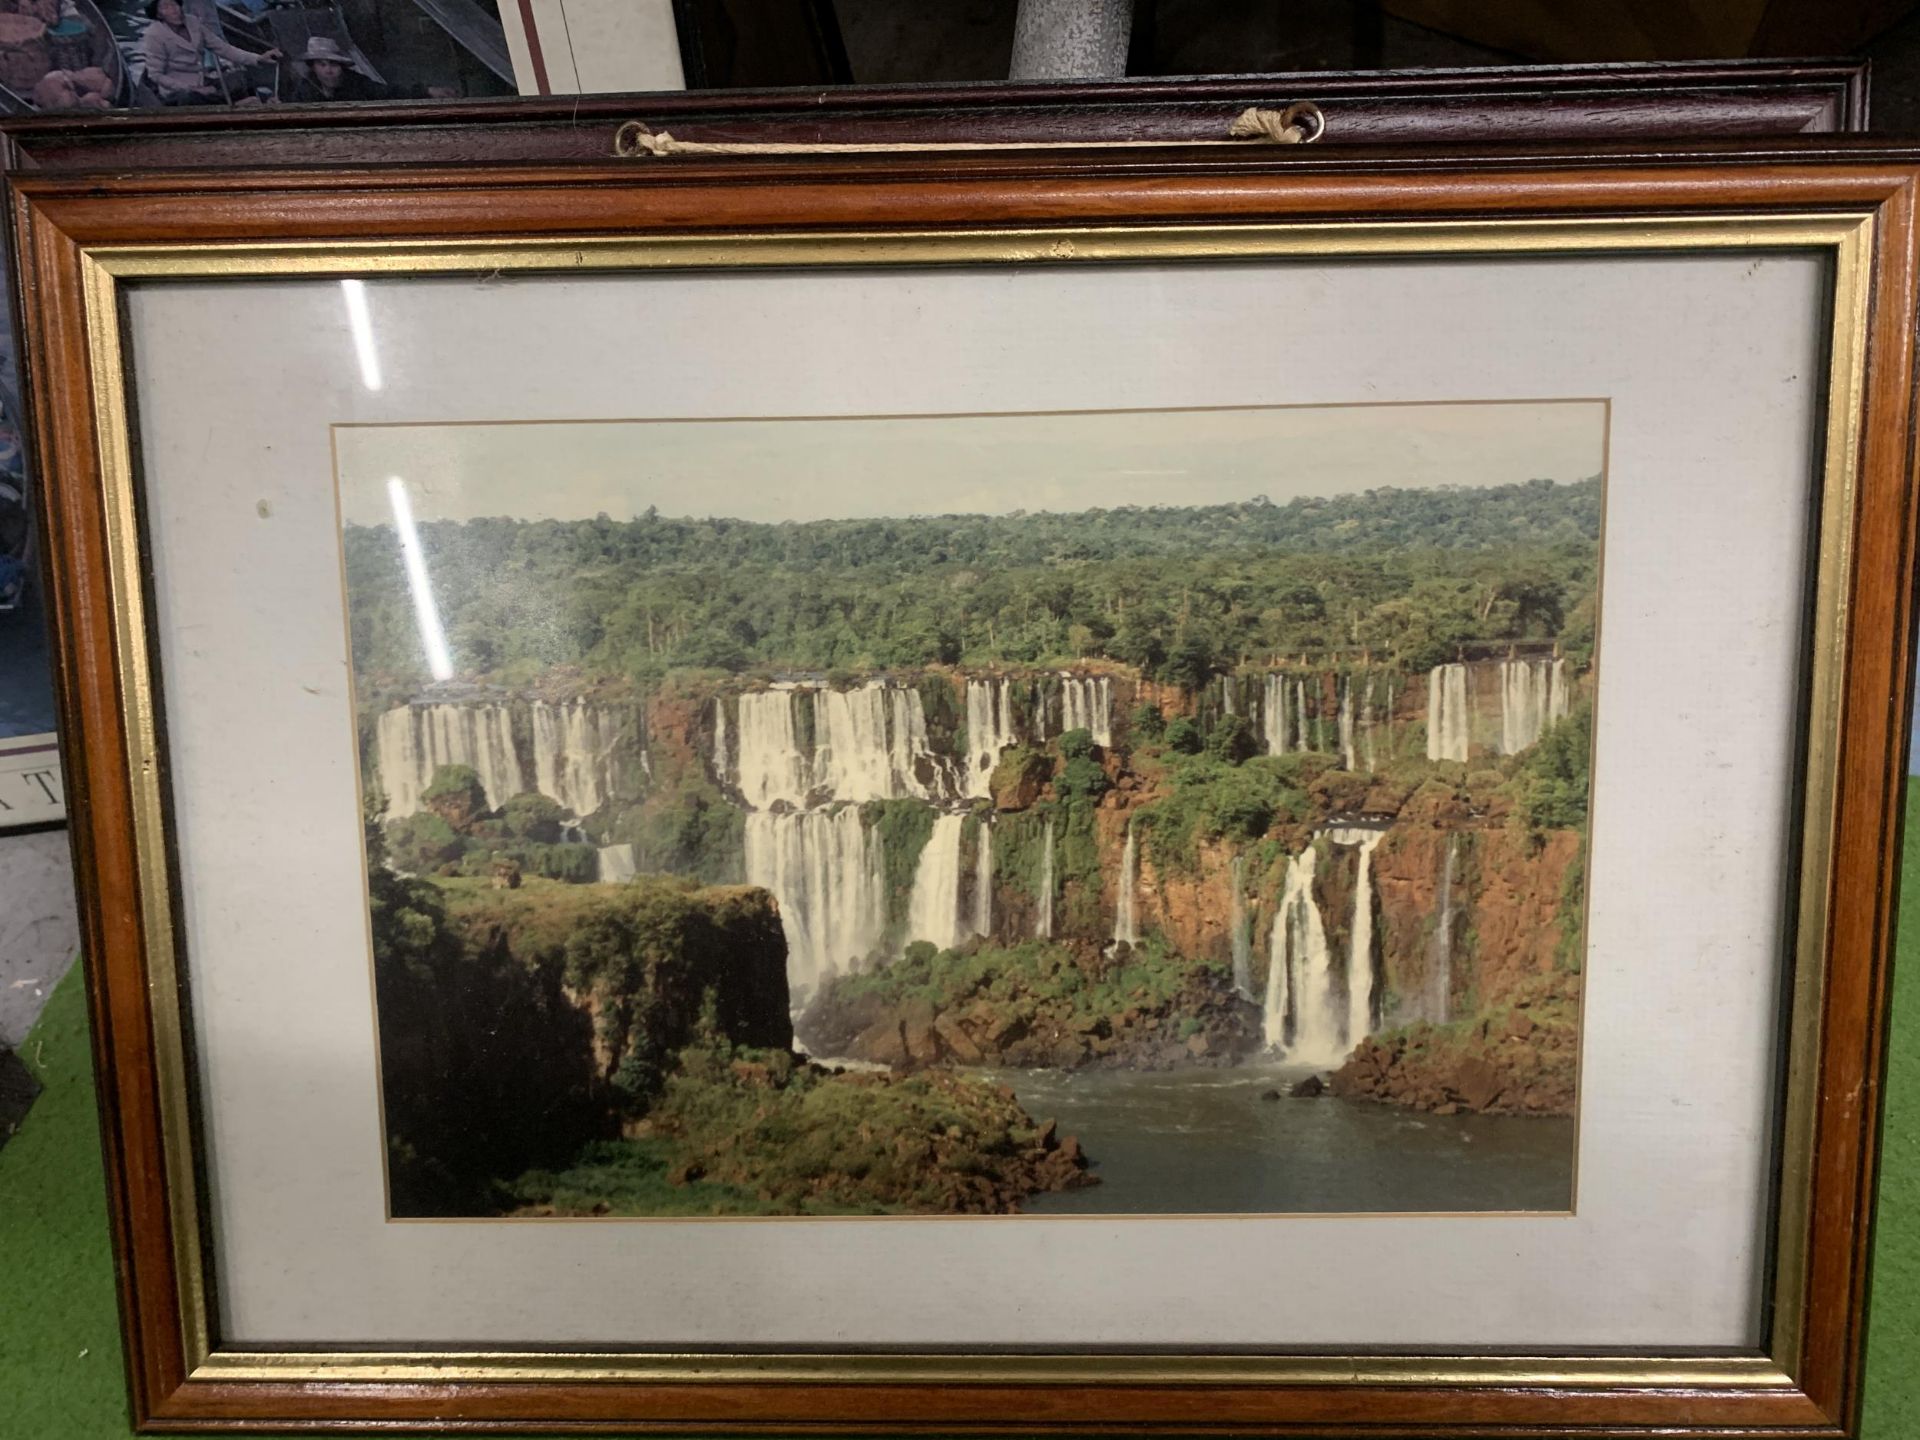 TWP FRAMED PHOTO'S OF WATERFALL SCENES TOGETHER WITH A FRAMED PRINT OF THE "FLOATING MARKET" - Bild 4 aus 4